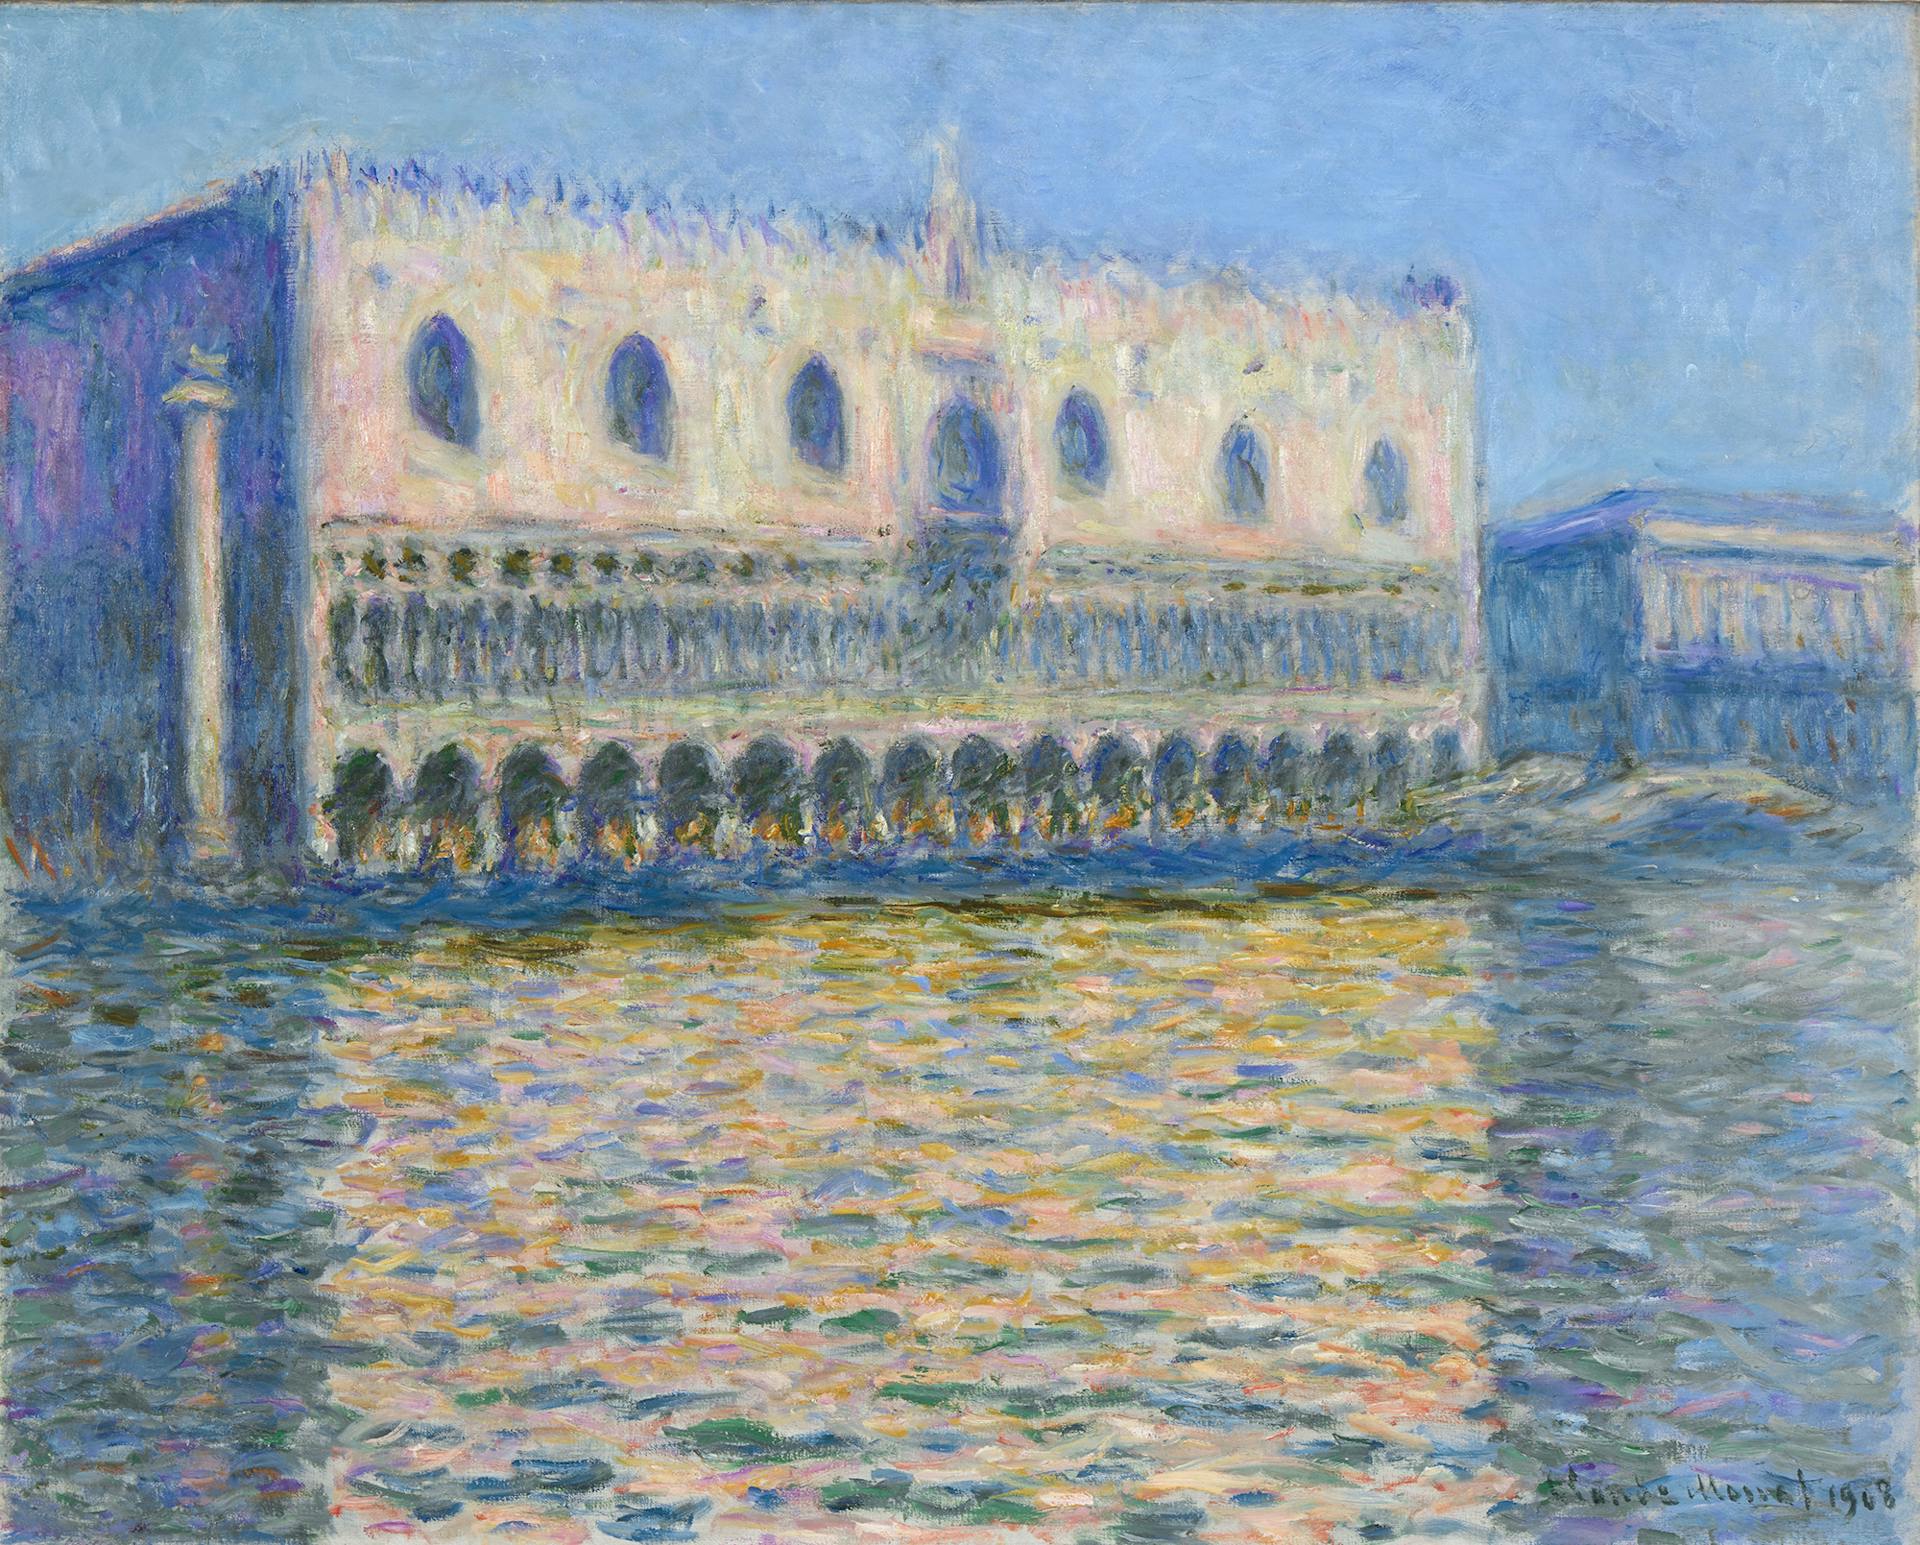 Claude Monet, ‘The Doge’s Palace,’ 1908, oil on canvas. Via Brooklyn Museum